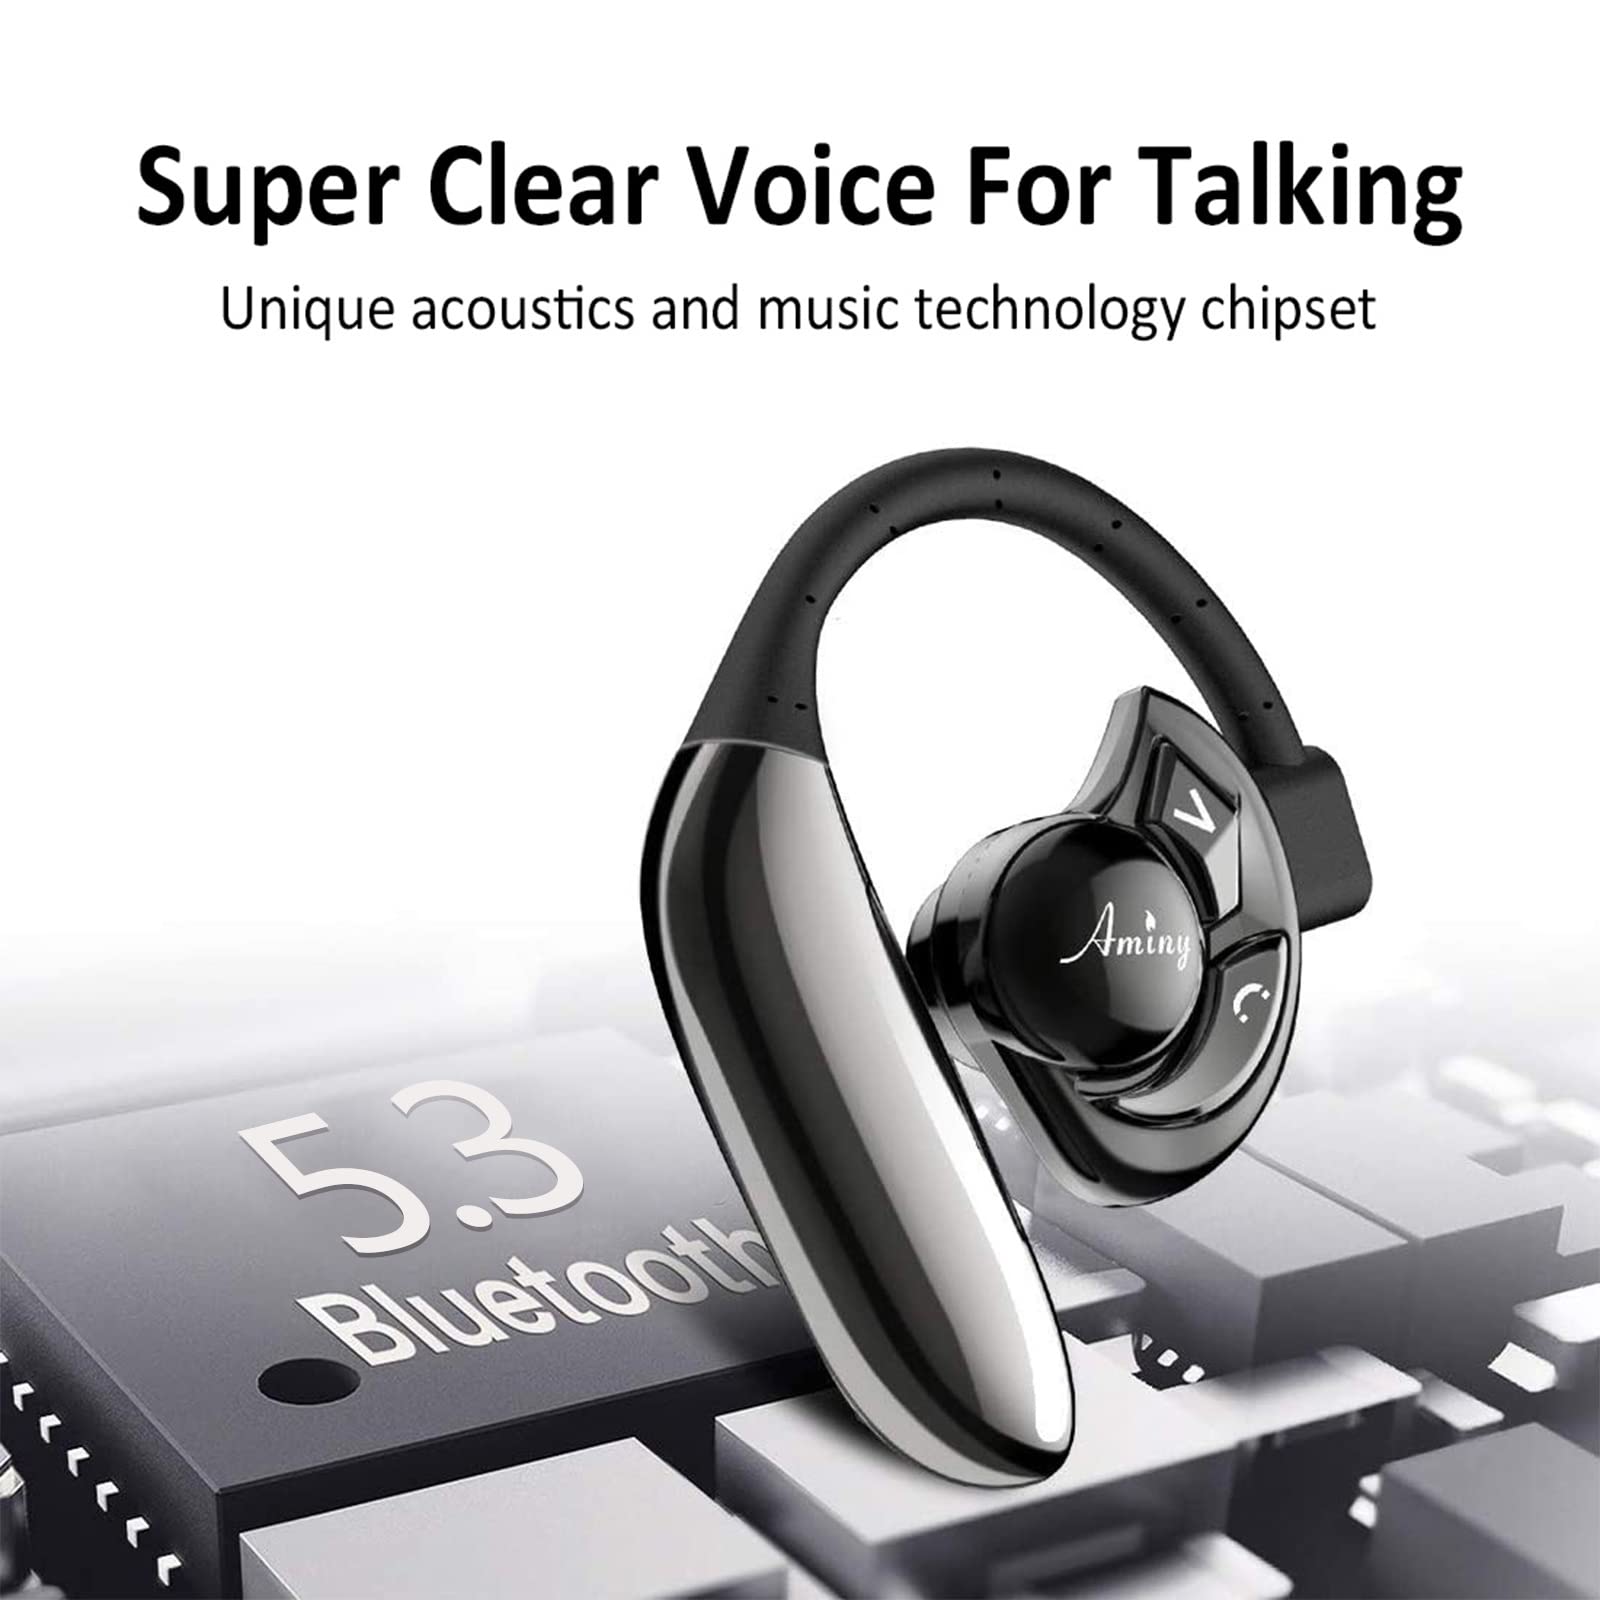 AMINY Bluetooth Headset,Wireless Bluetooth Earpiece Compatible with iPhone/Android Cell Phones,Auriculares Bluetooth Earpiece 28 Hrs Talking Time V5.3 Wireless Headset,Button Depress Version